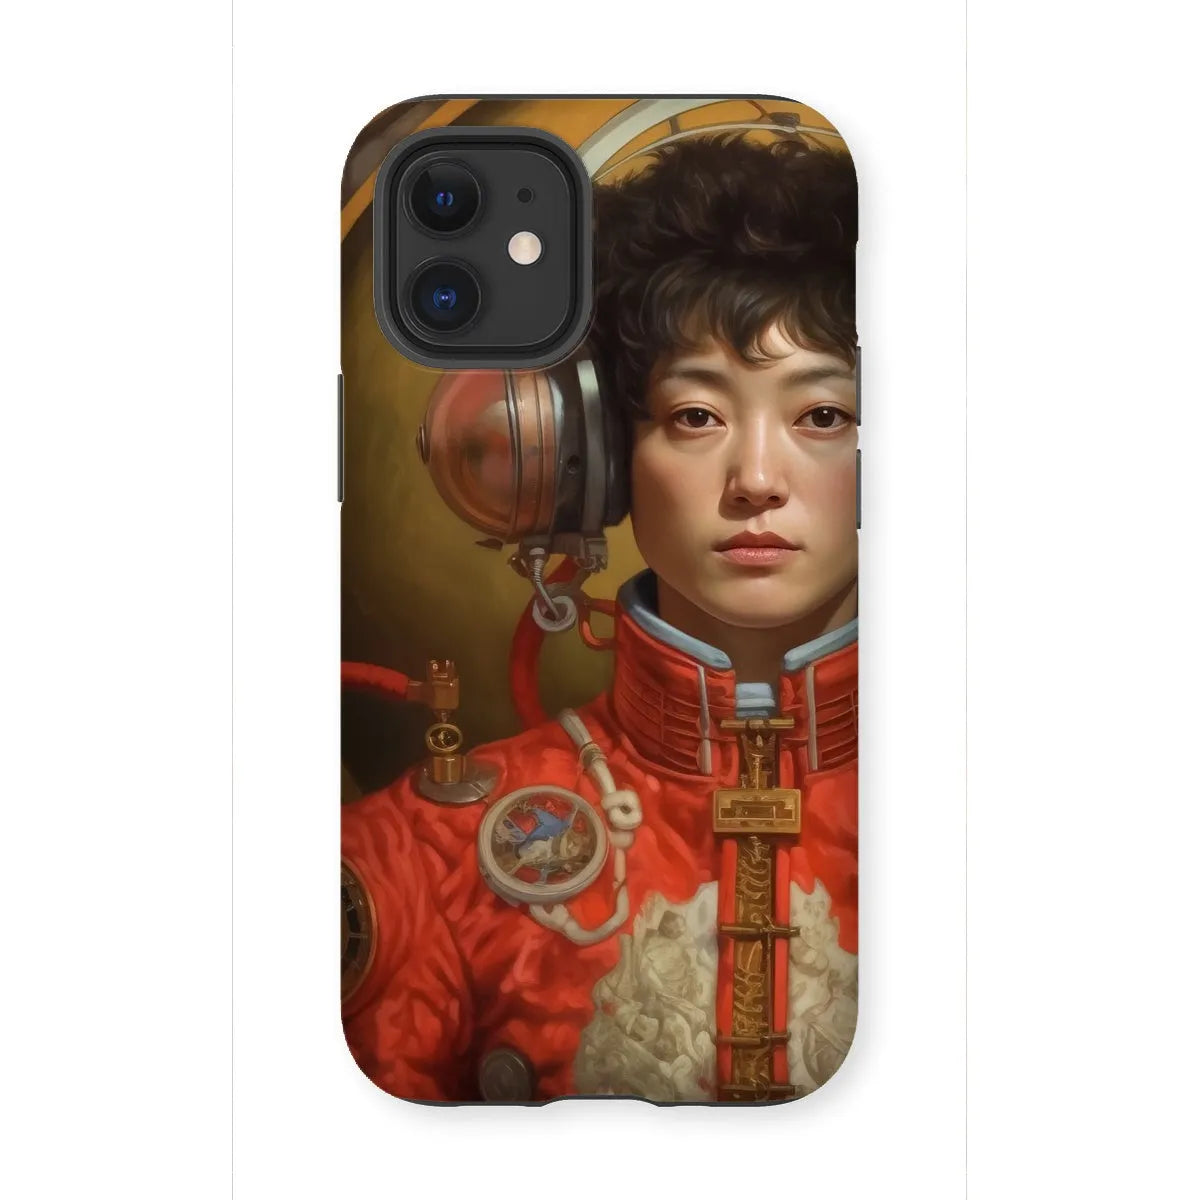 Mùchén - Gay Chinese Astronaut Aesthetic Phone Case - Iphone 12 Mini / Matte - Mobile Phone Cases - Aesthetic Art